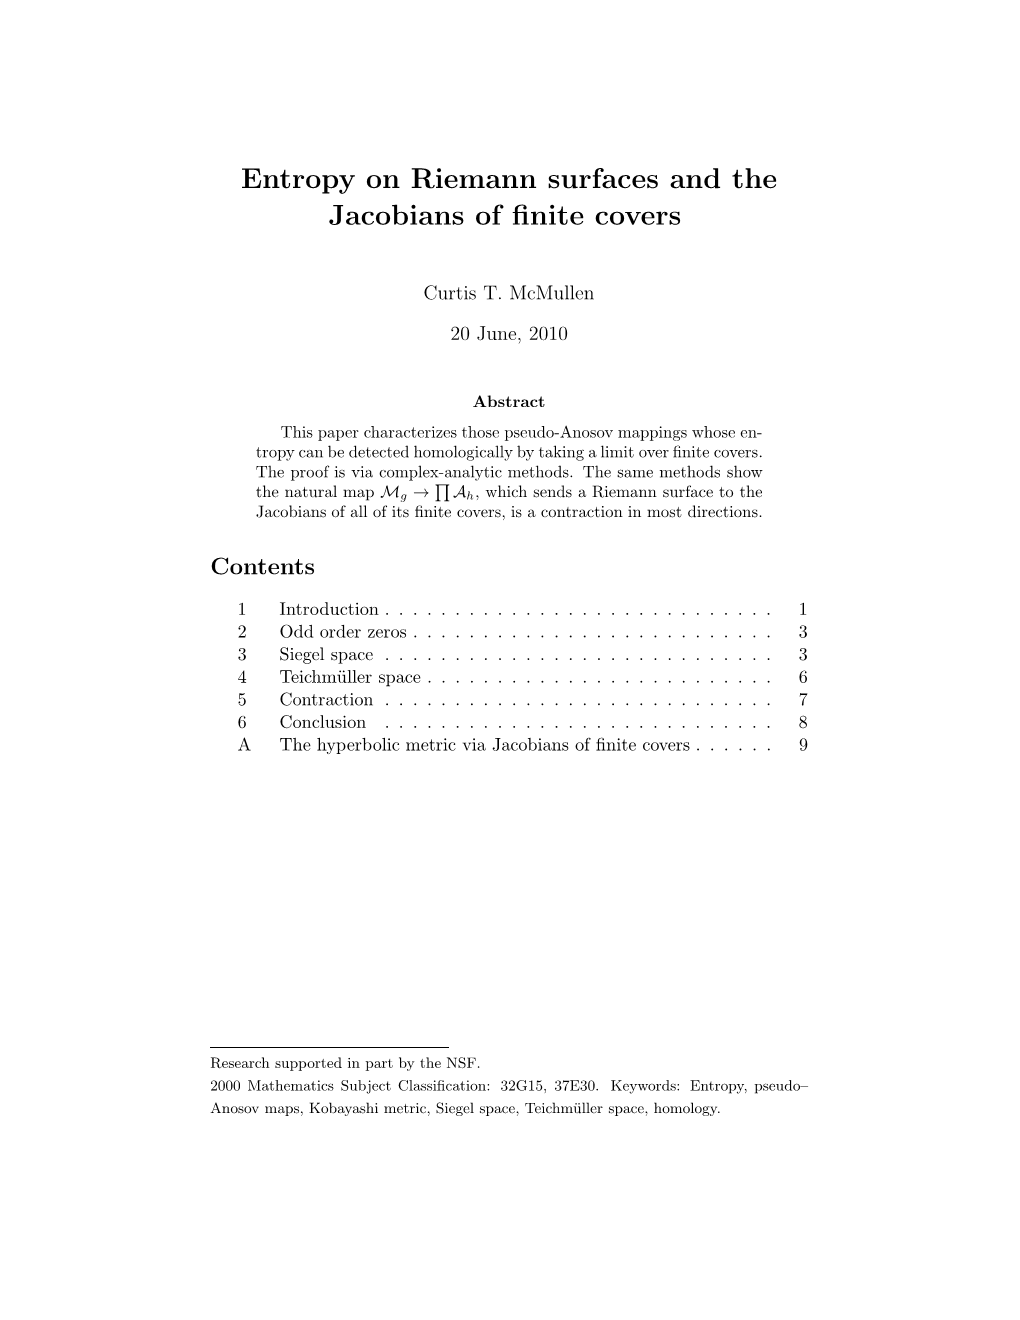 Entropy on Riemann Surfaces and the Jacobians of Finite Covers